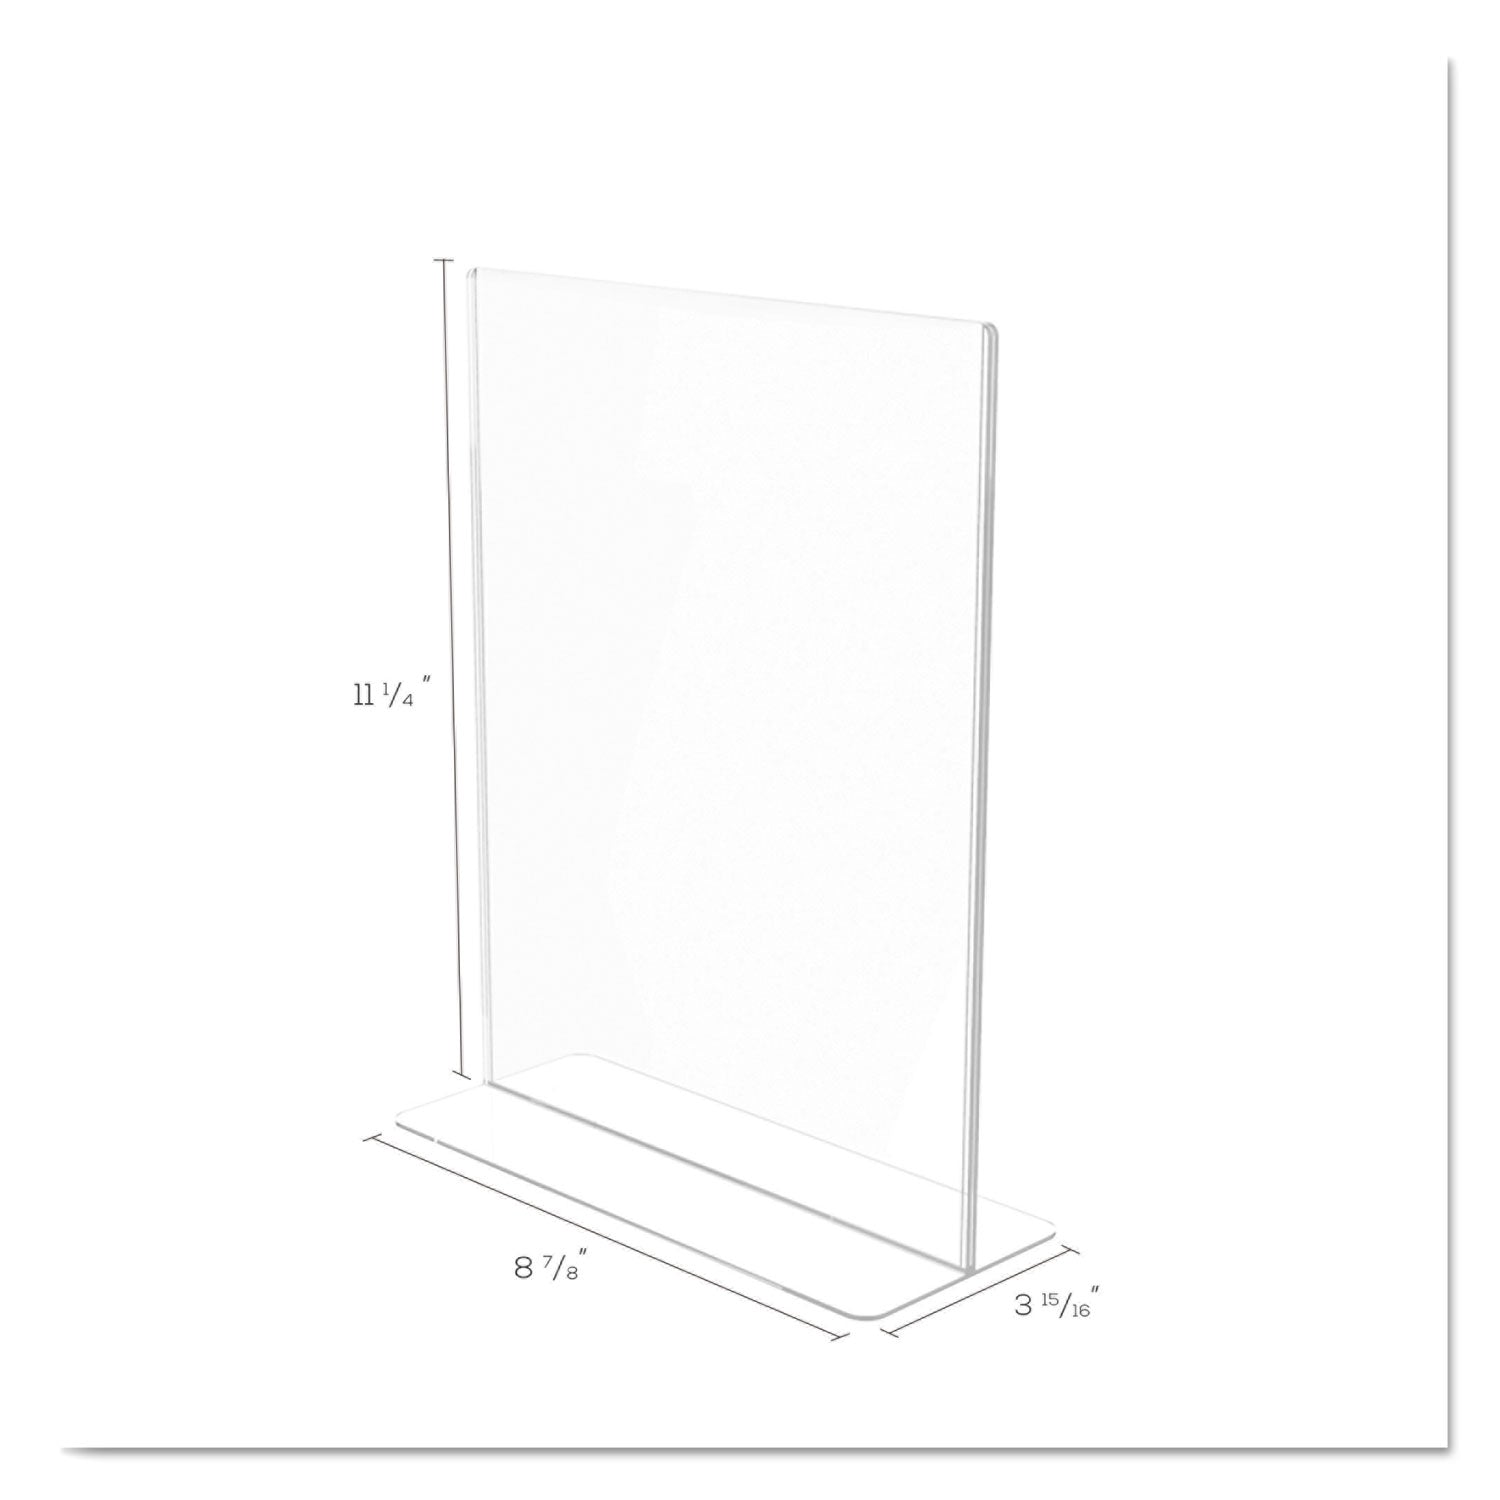 Superior Image Double Sided Sign Holder, 8.5 x 11 Insert, Clear - 